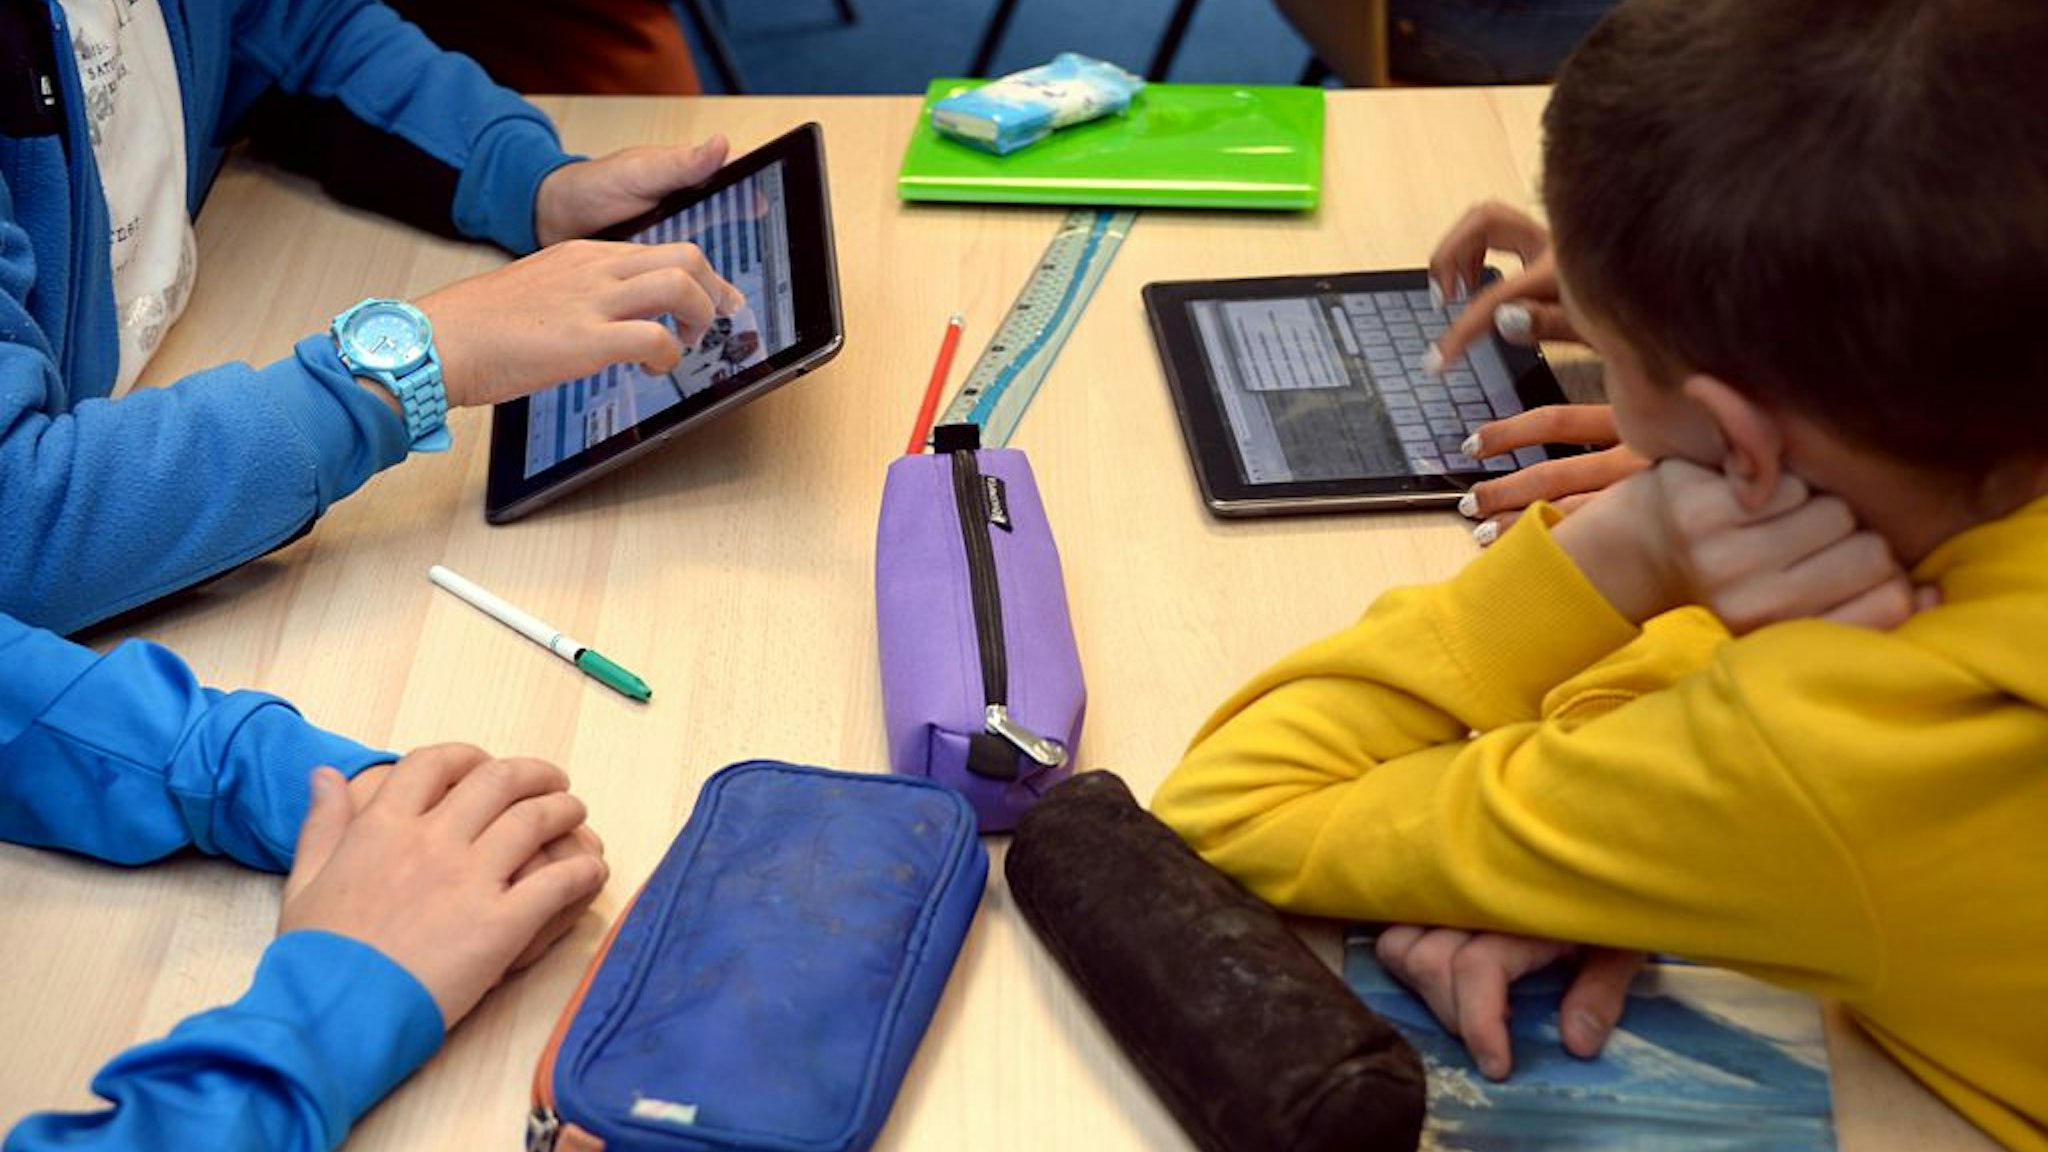 Pupils use tablets during courses in a classroom at the Leonard de Vinci 'connected' middle school in Saint-Brieuc, western France on September 12, 2013. The Leonard de Vinci school is one of the 23 middle schools in France to be connected to the internet and to be using new information technologies during courses. AFP